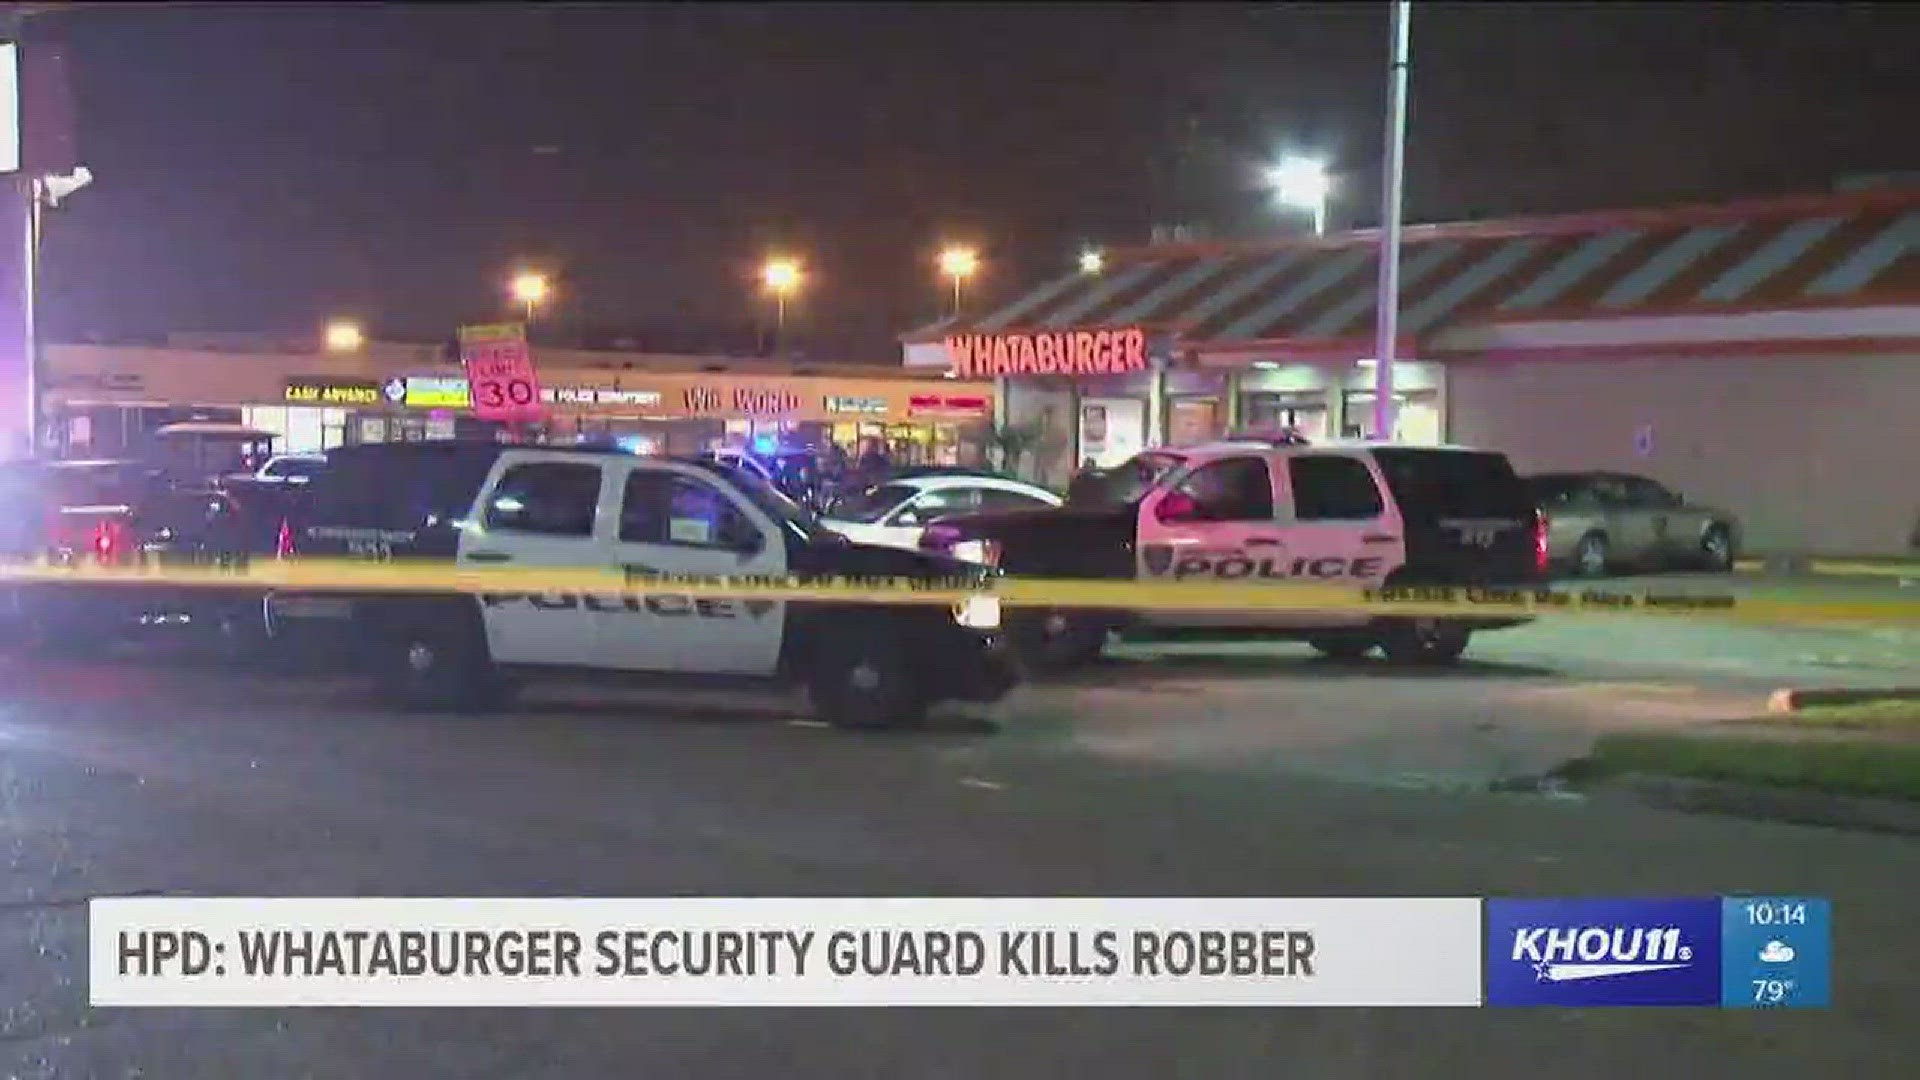 A man who attempted to rob a Whataburger early Saturday morning was shot and killed by a security guard, police say.